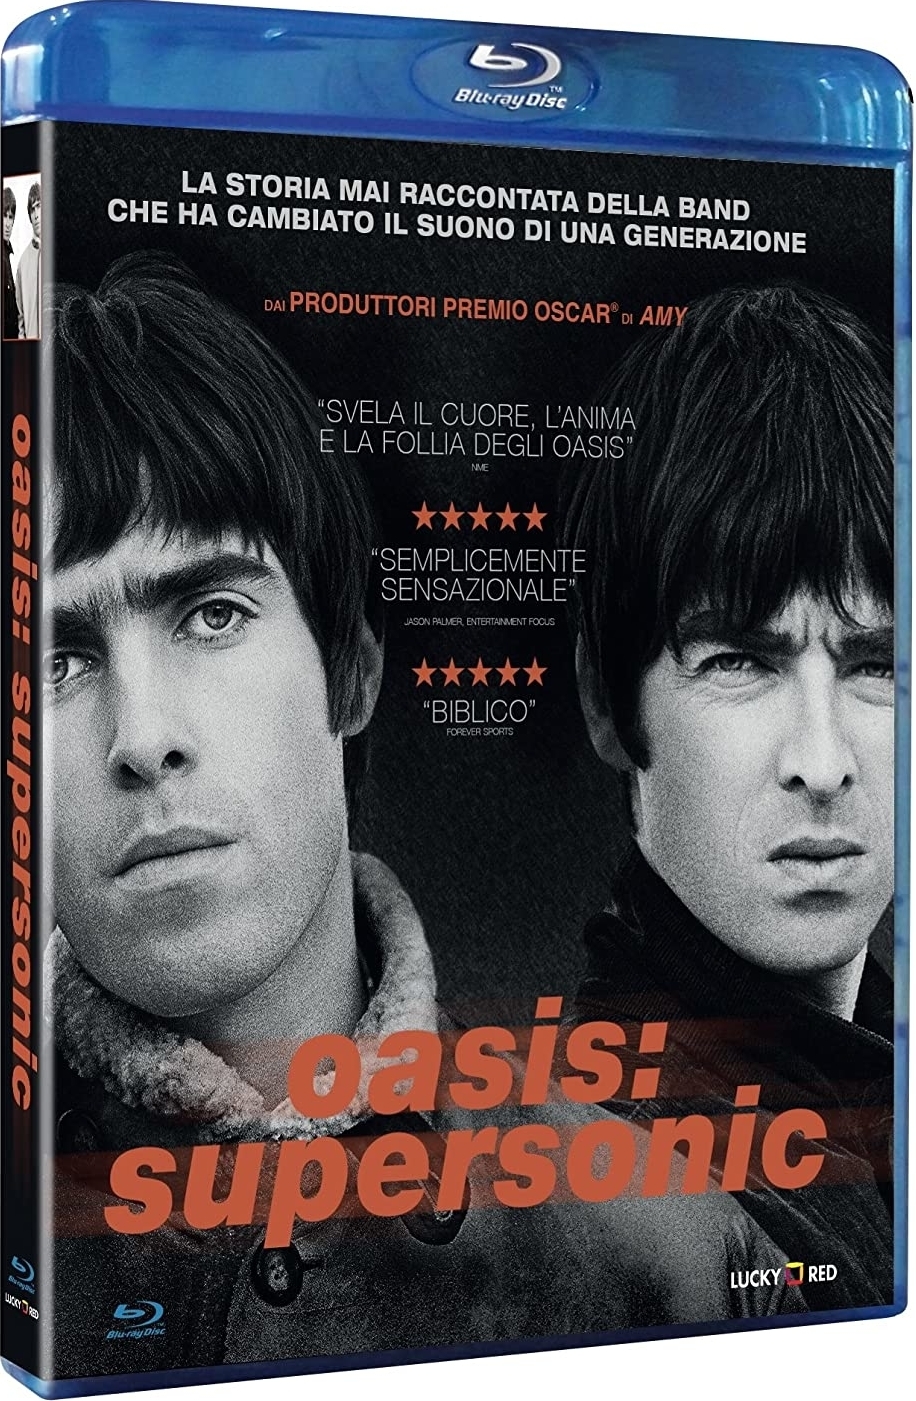  Oasis - Supersonic [Blu-ray] : Movies & TV